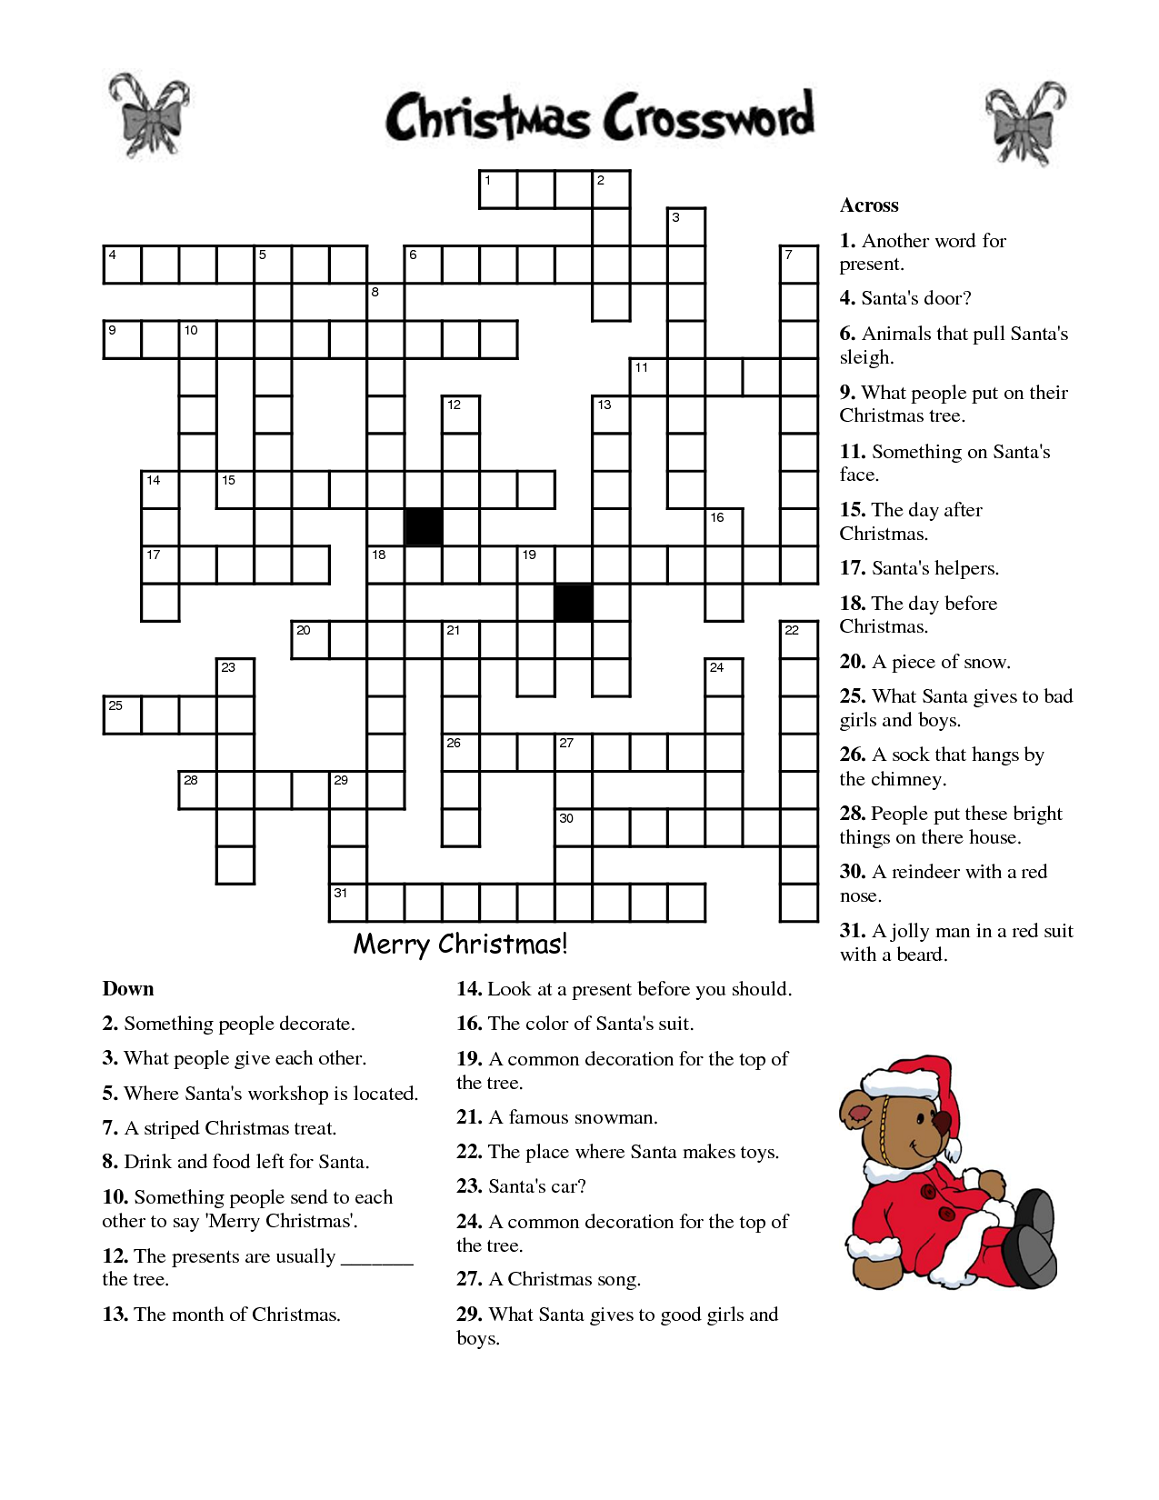 printable-crossword-puzzles-for-kids-printable-blank-world